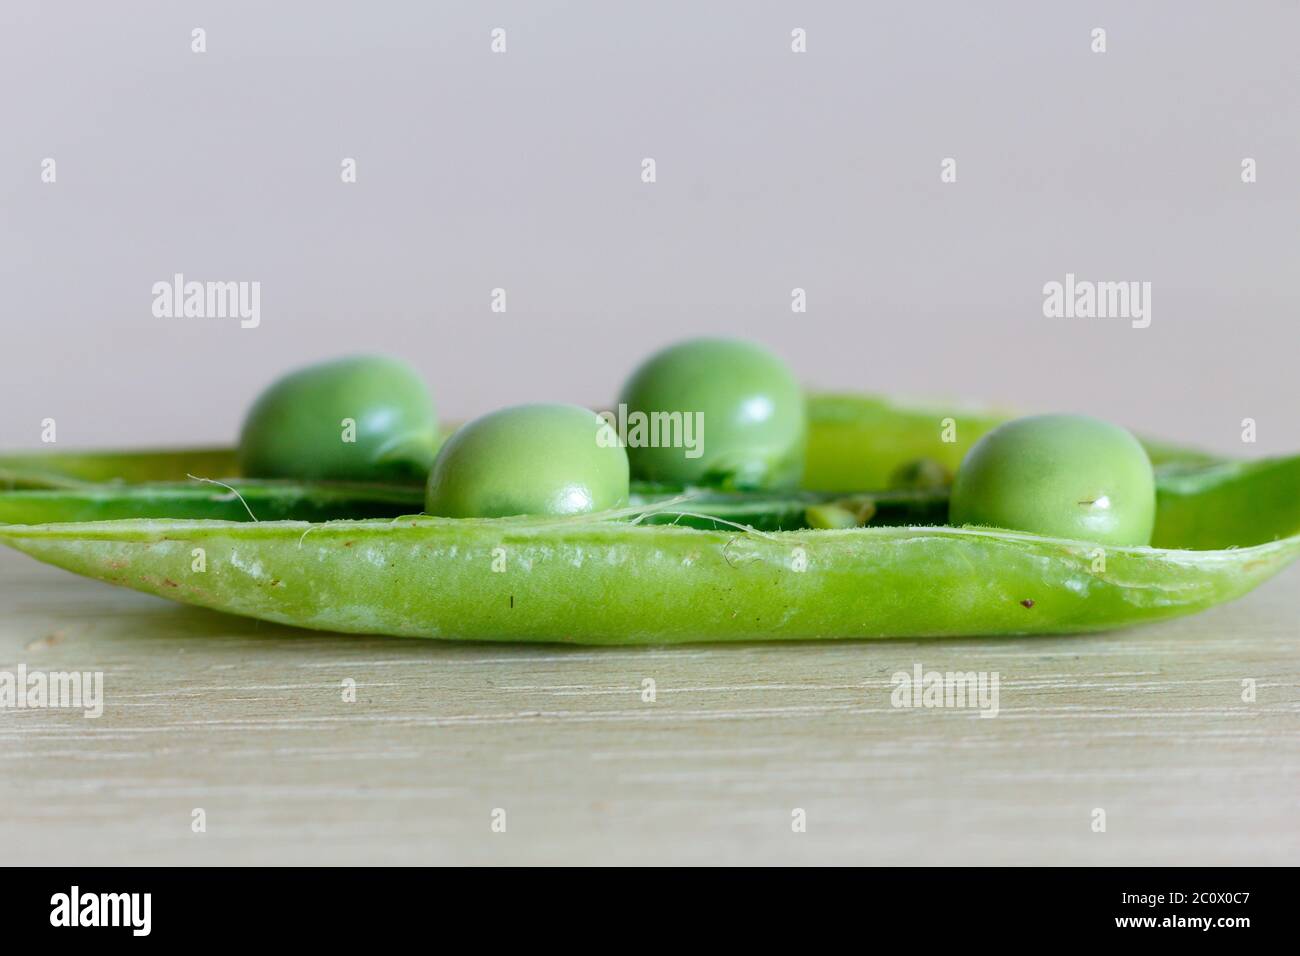 Fresh Pea Close Up. Image Useful For Articles About Agriculture, Food and Healthy Food. Stock Photo